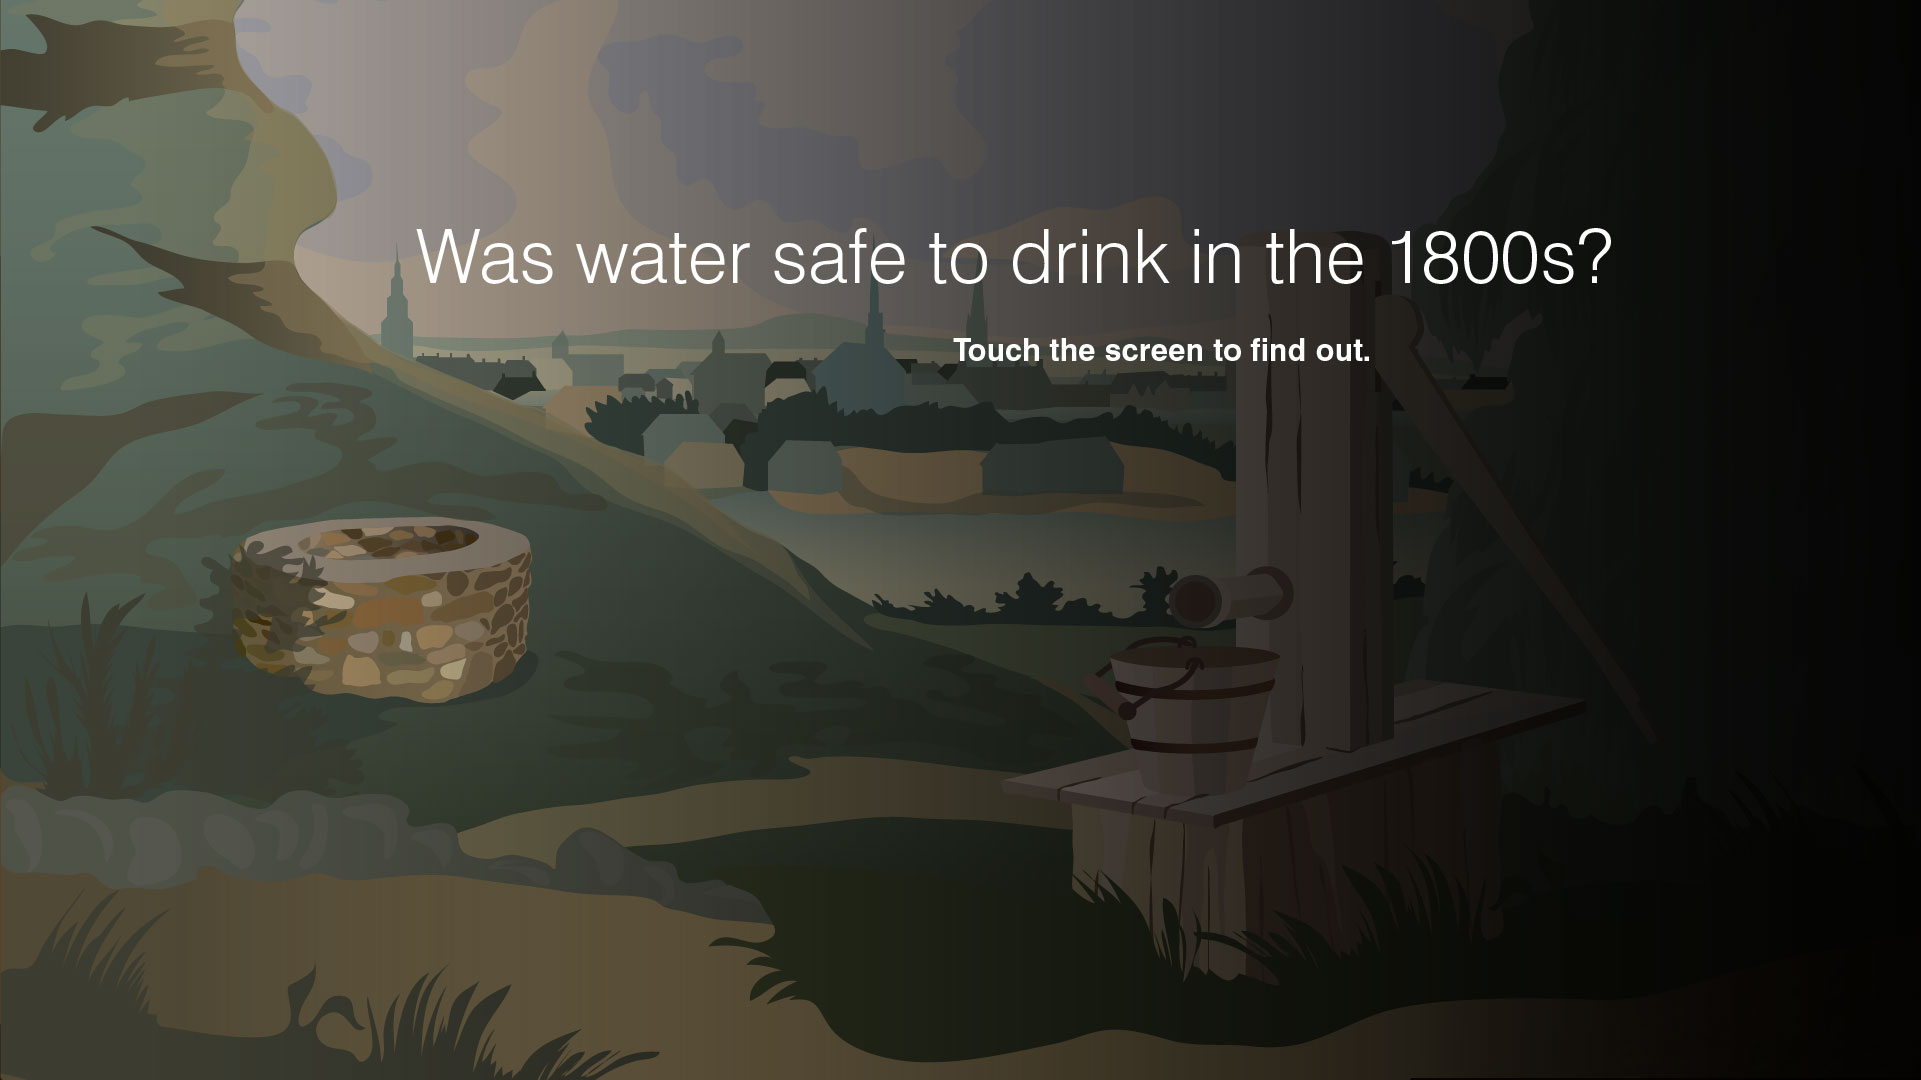 Was water safe to drink in the 1800s? Touch the screen to find out.